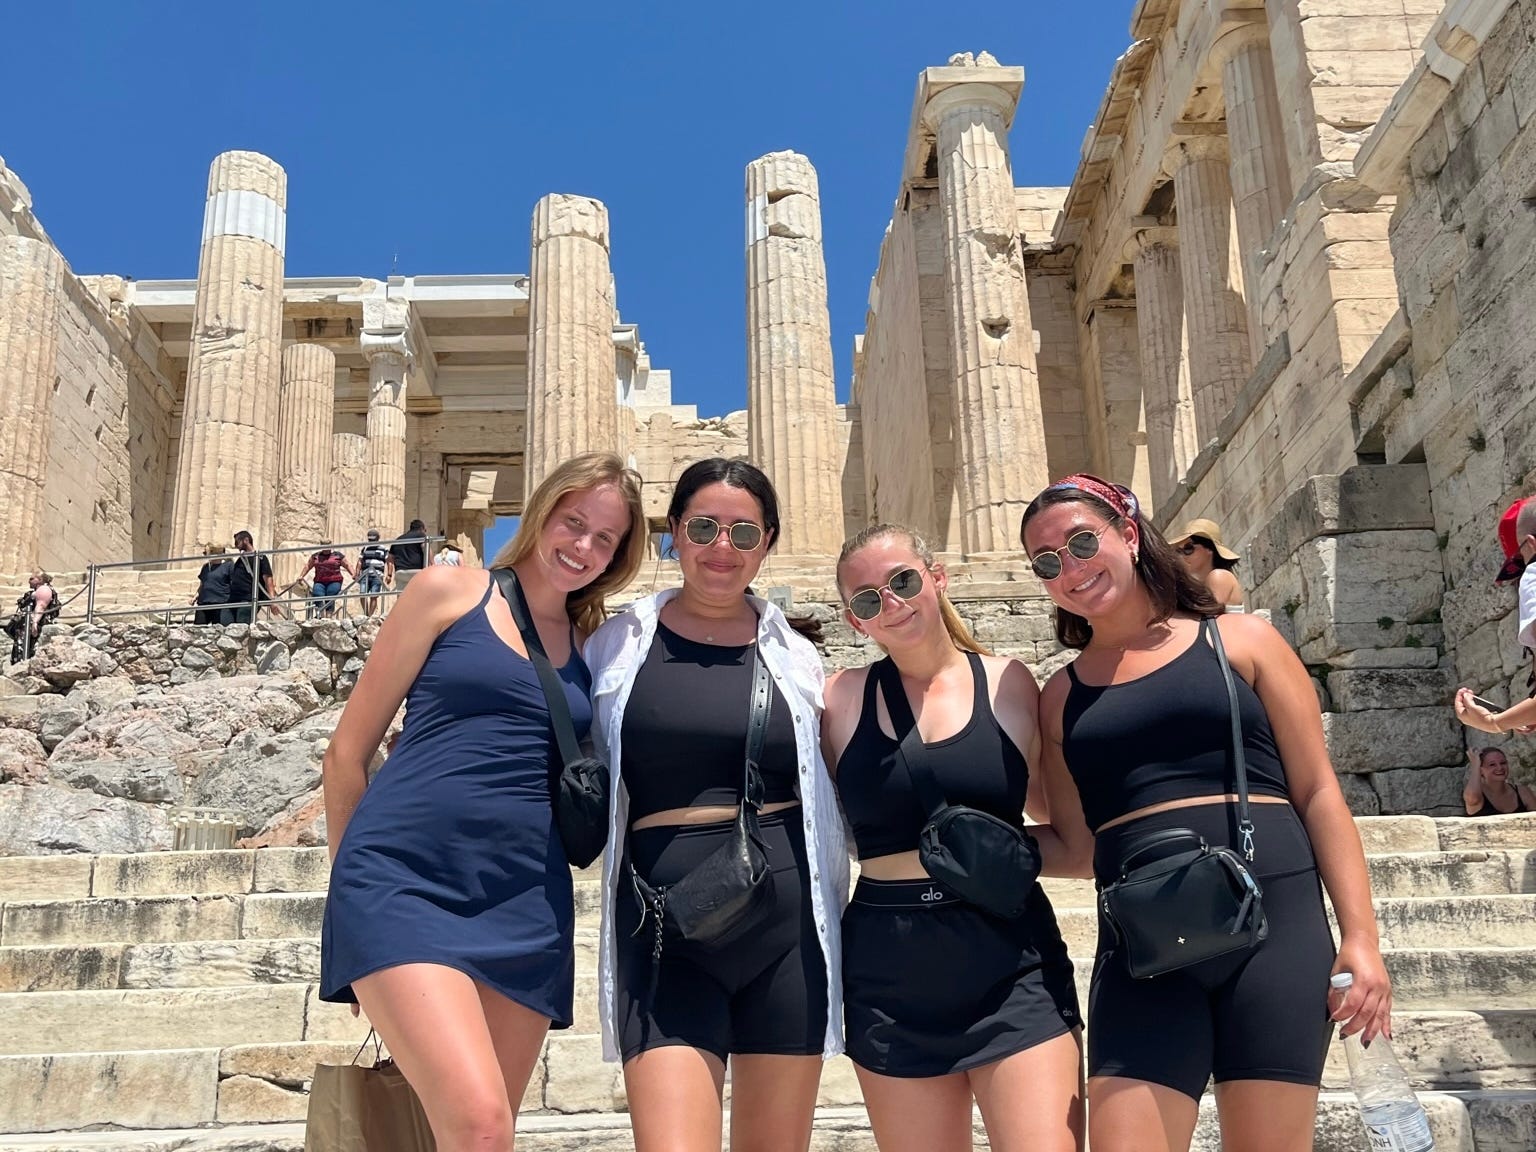 <ul class="summary-list"><li><strong>I traveled to Greece with three of my best friends to </strong><a href="https://www.businessinsider.com/best-things-to-do-athens-greece-what-to-skip-2023-11"><strong>see Athens</strong></a><strong>, Santorini, Mykonos, and Naxos.</strong></li><li><strong>Our Airbnb host gave us the </strong><a href="https://www.businessinsider.com/best-restaurants-where-to-eat-santorini-greece"><strong>best local food</strong></a><strong> and activity recommendations.</strong></li><li><strong>Next time, we'd avoid </strong><a href="https://www.businessinsider.com/pros-cons-turo-use-for-renting-2023-4"><strong>renting a car</strong></a><strong> — two flat tires were enough to scar us for life.</strong></li></ul><p>Following our college graduation last May, three of my best friends and I traveled to <a href="https://www.businessinsider.com/best-places-to-visit-in-greece-this-summer-2022-7">Greece for eight days</a>.</p><p>We flew to Athens and took a ferry between Mykonos, Santorini, and Naxos.</p><p>Although there were many highlights, there are also things we'd do differently next time.</p><div class="read-original">Read the original article on <a href="https://www.businessinsider.com/best-things-to-do-greece-vacation-with-friends-mistakes-avoid-2024-2">Business Insider</a></div>